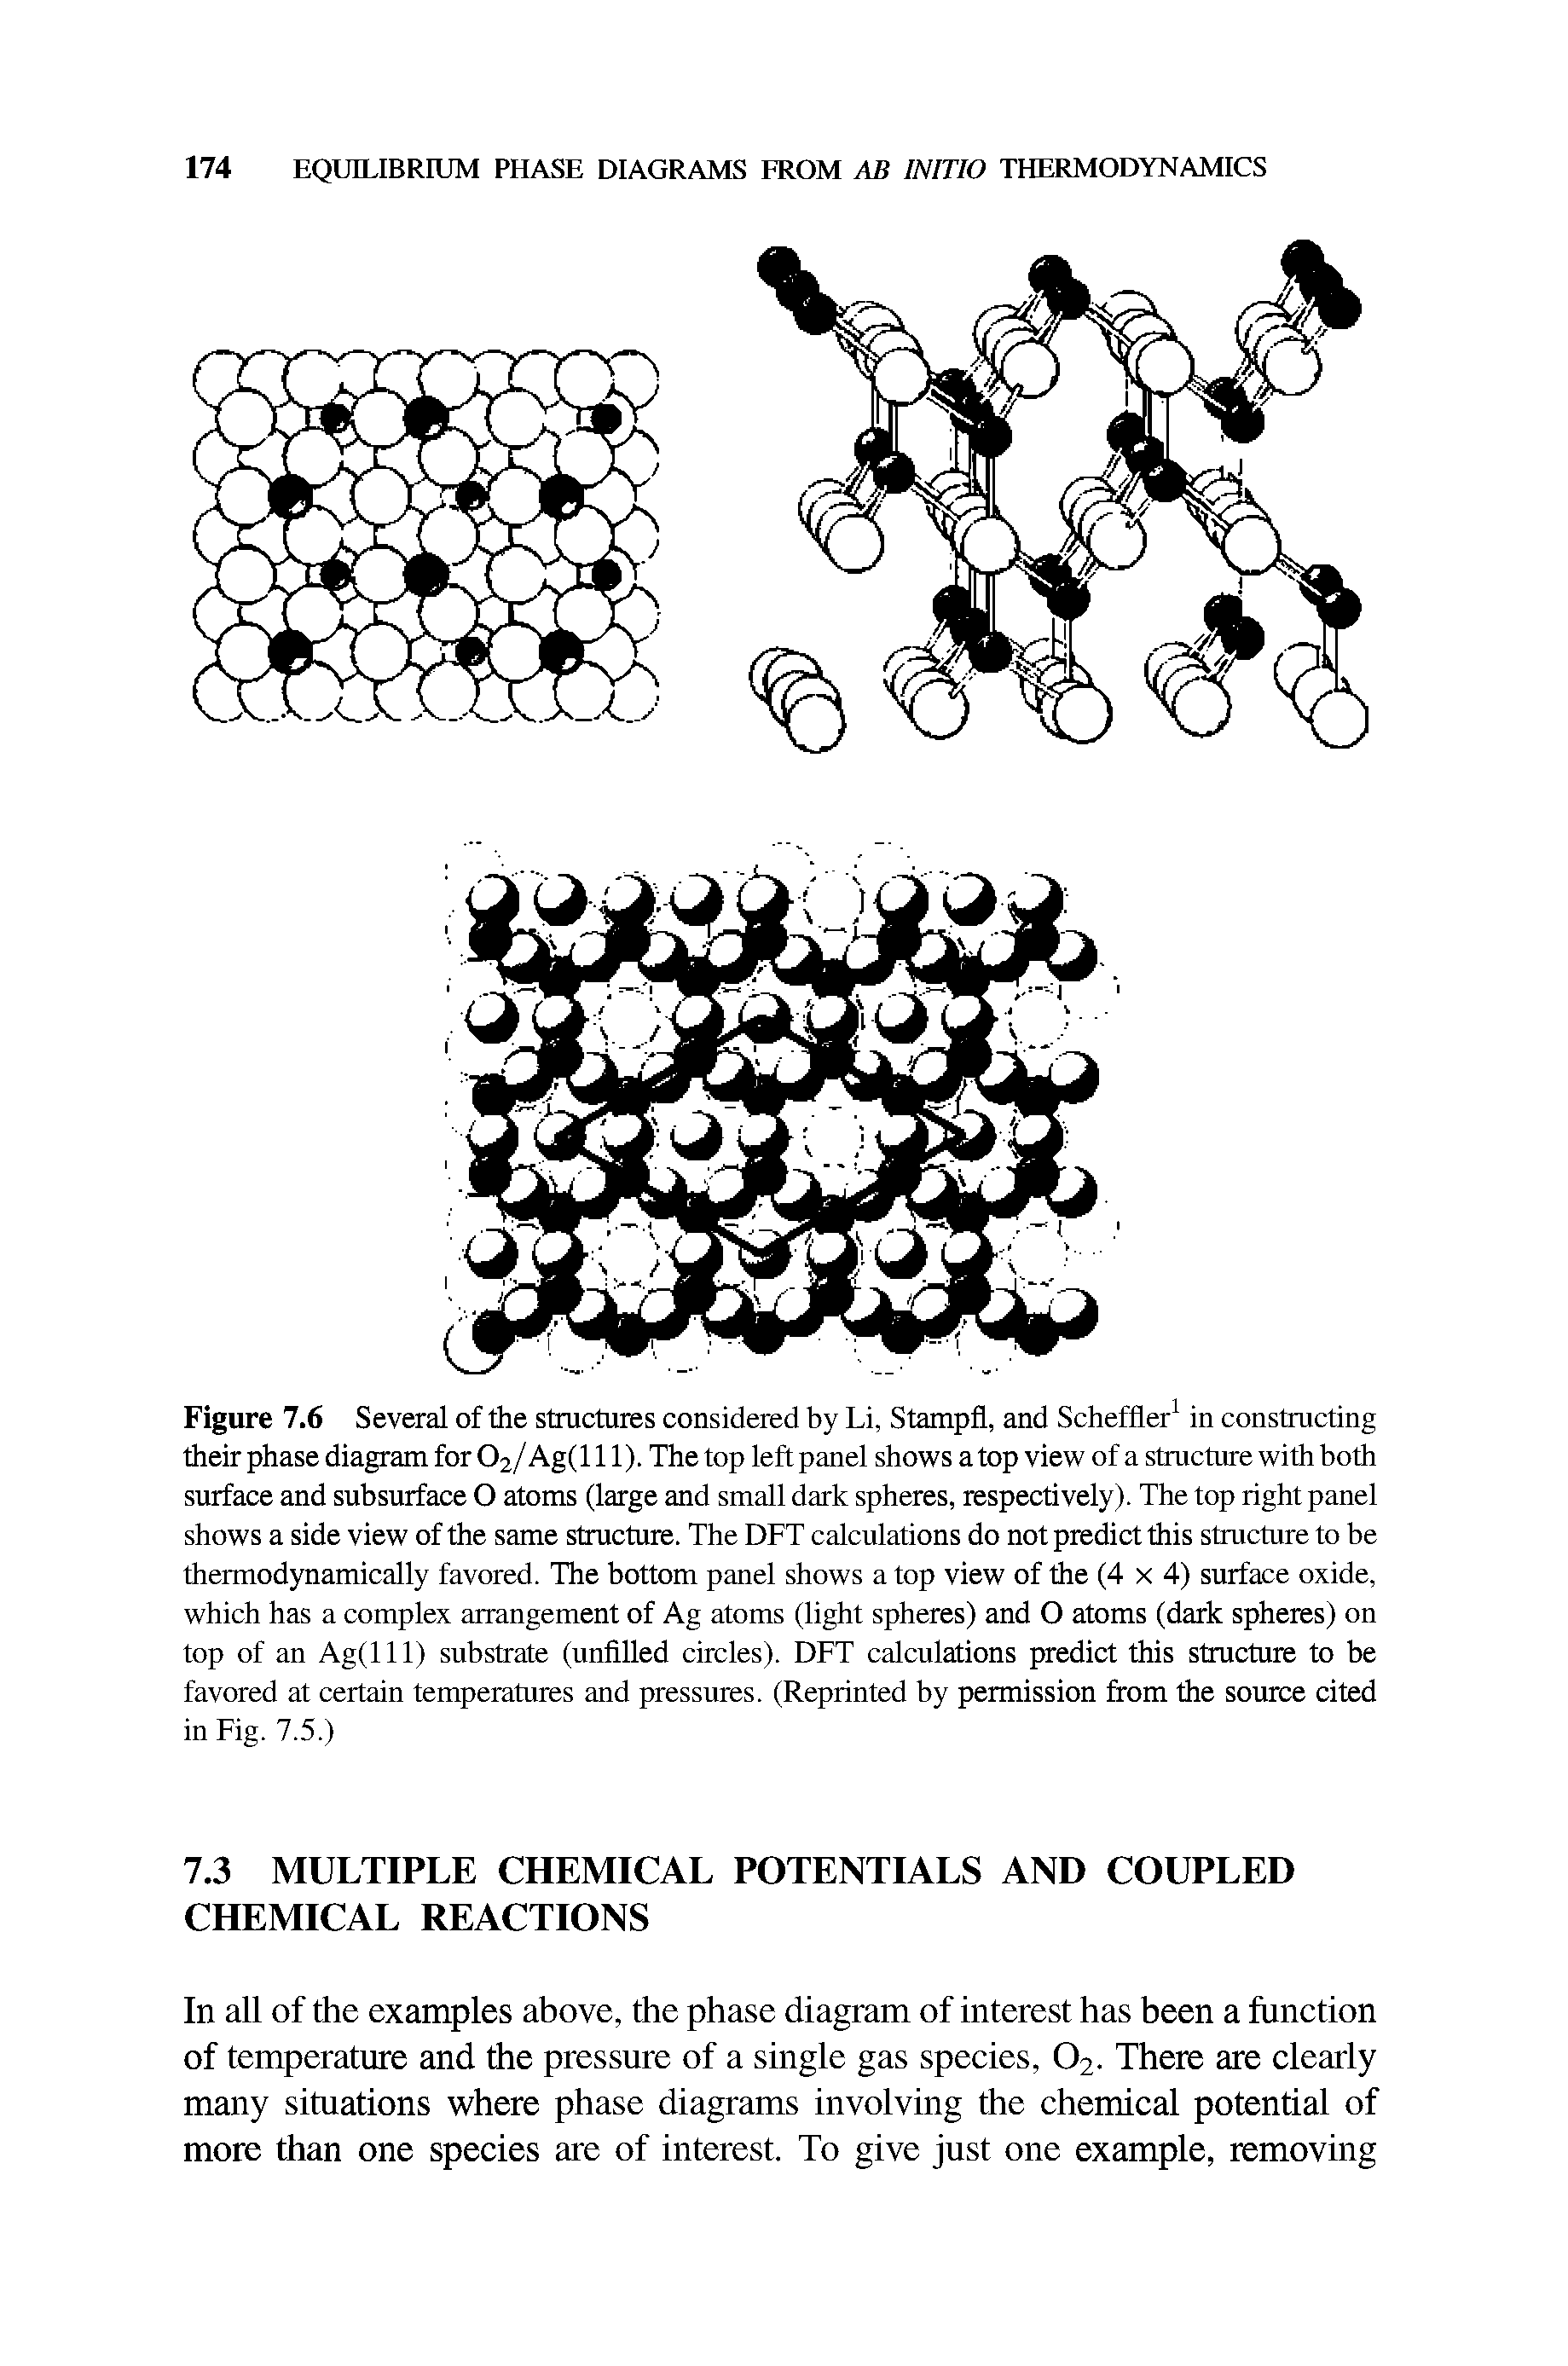 Figure 7.6 Several of the structures considered by Li, Stampfl, and Scheffler1 in constructing their phase diagram for 02/ Ag( 111). The top left panel shows a top view of a structure with both surface and subsurface O atoms (large and small dark spheres, respectively). The top right panel shows a side view of the same structure. The DFT calculations do not predict this structure to be thermodynamically favored. The bottom panel shows a top view of the (4 x 4) surface oxide, which has a complex arrangement of Ag atoms (light spheres) and O atoms (dark spheres) on top of an Ag(lll) substrate (unfilled circles). DFT calculations predict this structure to be favored at certain temperatures and pressures. (Reprinted by permission from the source cited in Fig. 7.5.)...